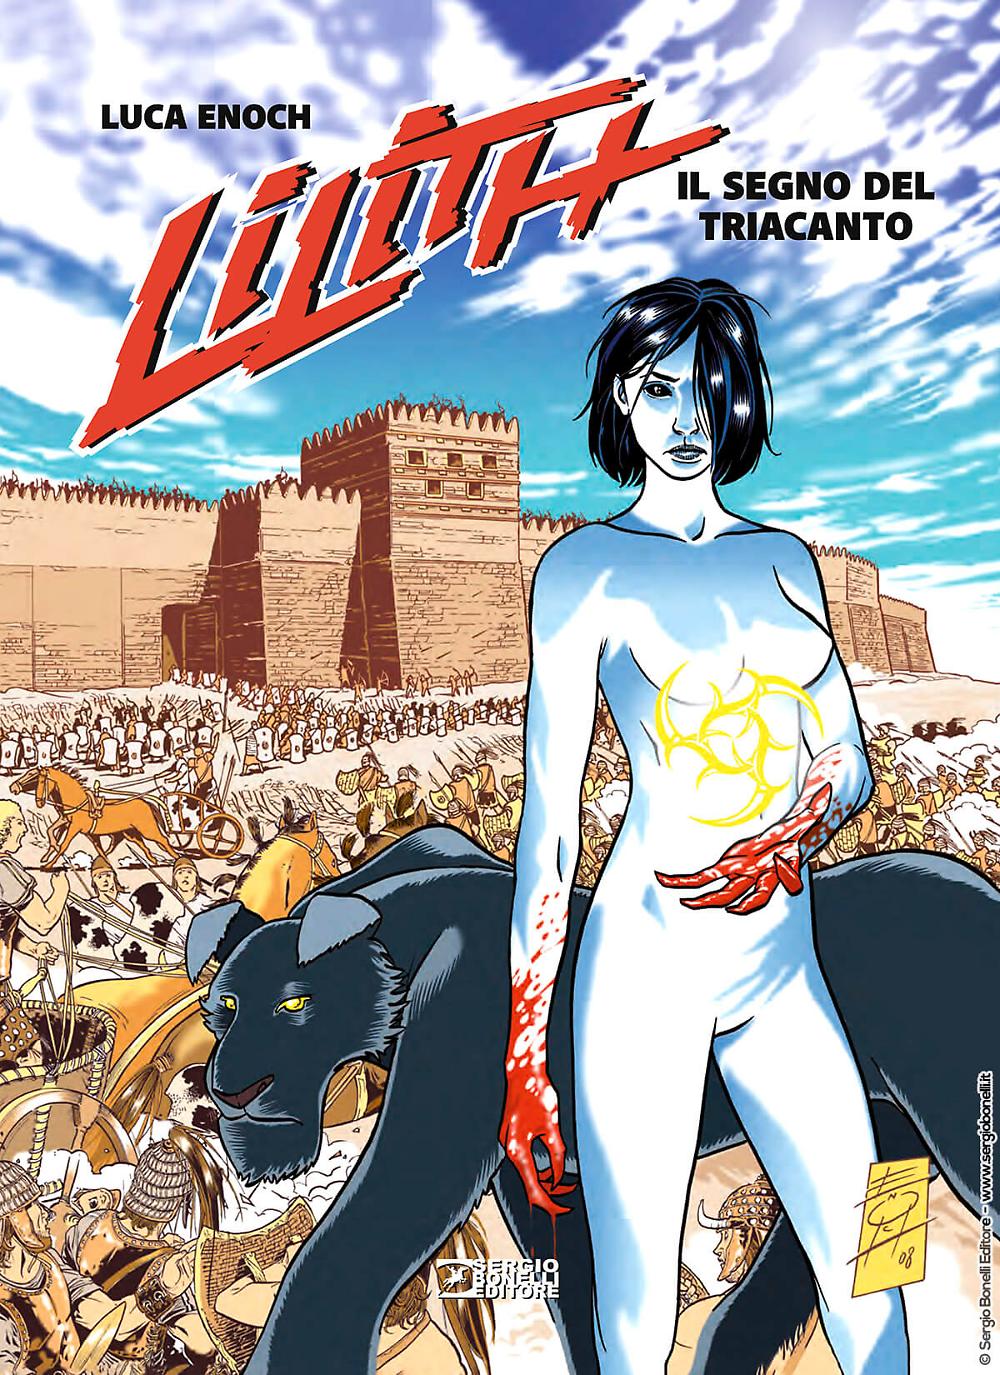 Sergio Bonelli Editore presents “LILITH 01. THE SIGN OF THE TRIACANTHUS” by Luca Enoch